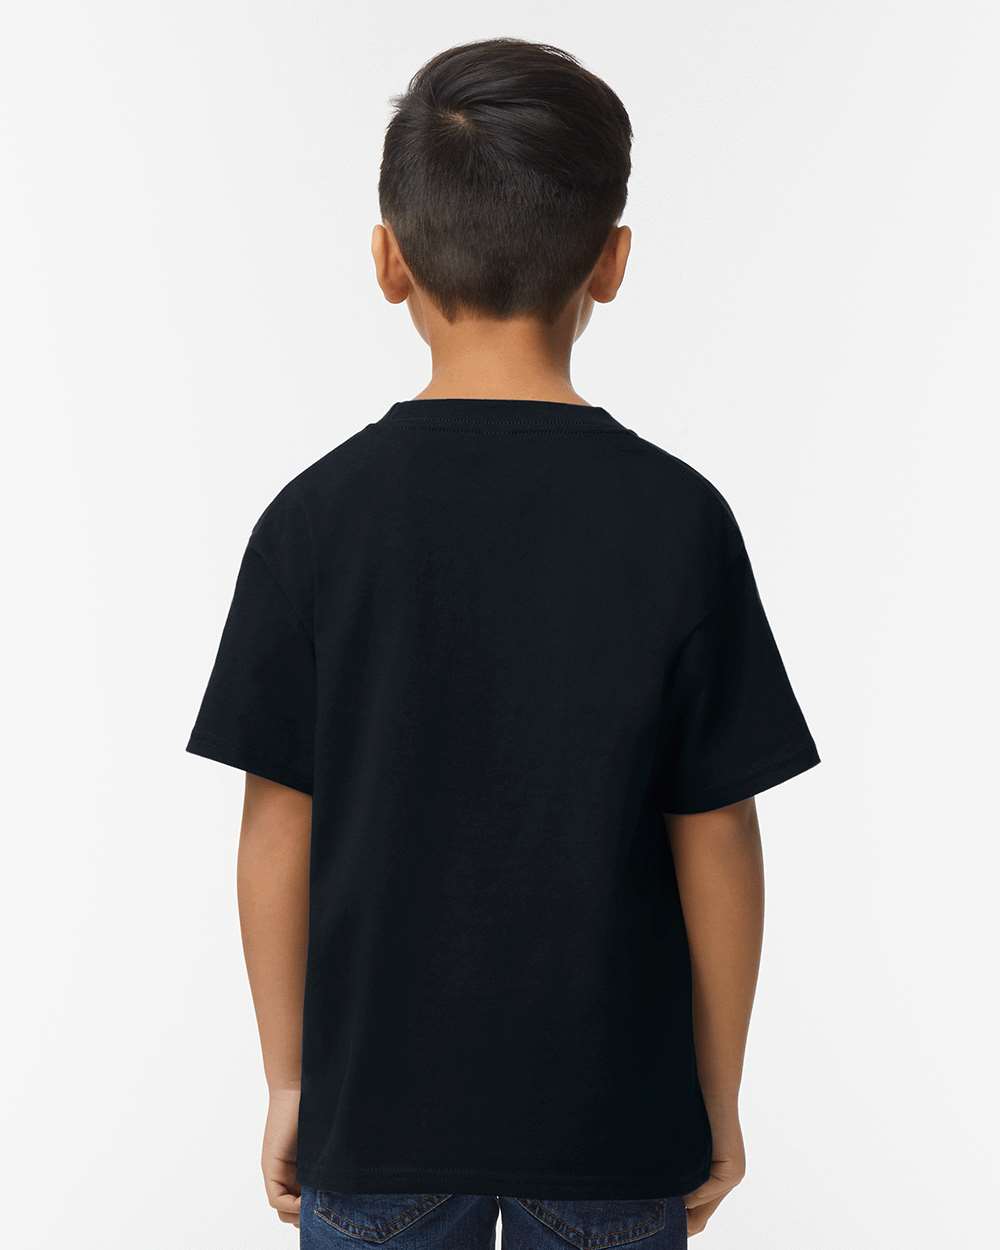 Gildan Softstyle® Youth Midweight T-Shirt 65000B #colormdl_Pitch Black